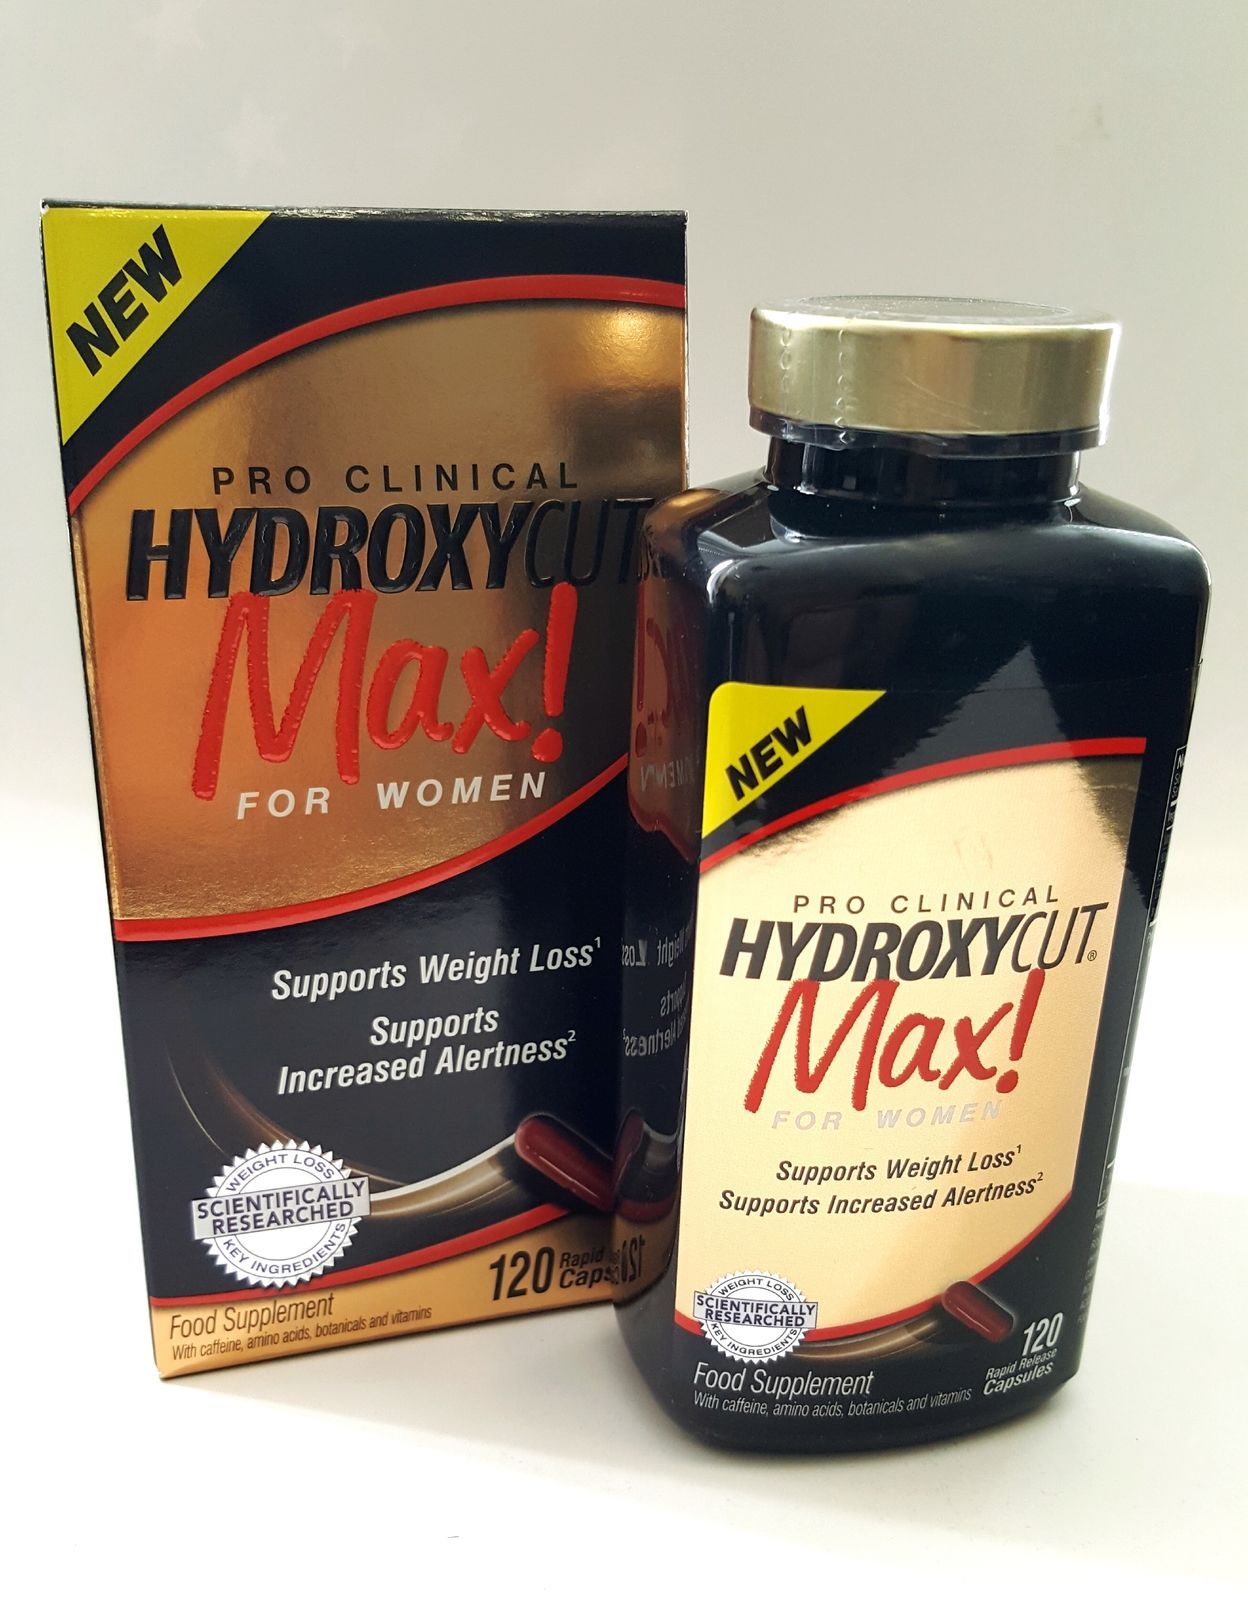 HYDROXYCUT MAX For Women 120 Caps fat burner loss weight diet slimming - $28.57